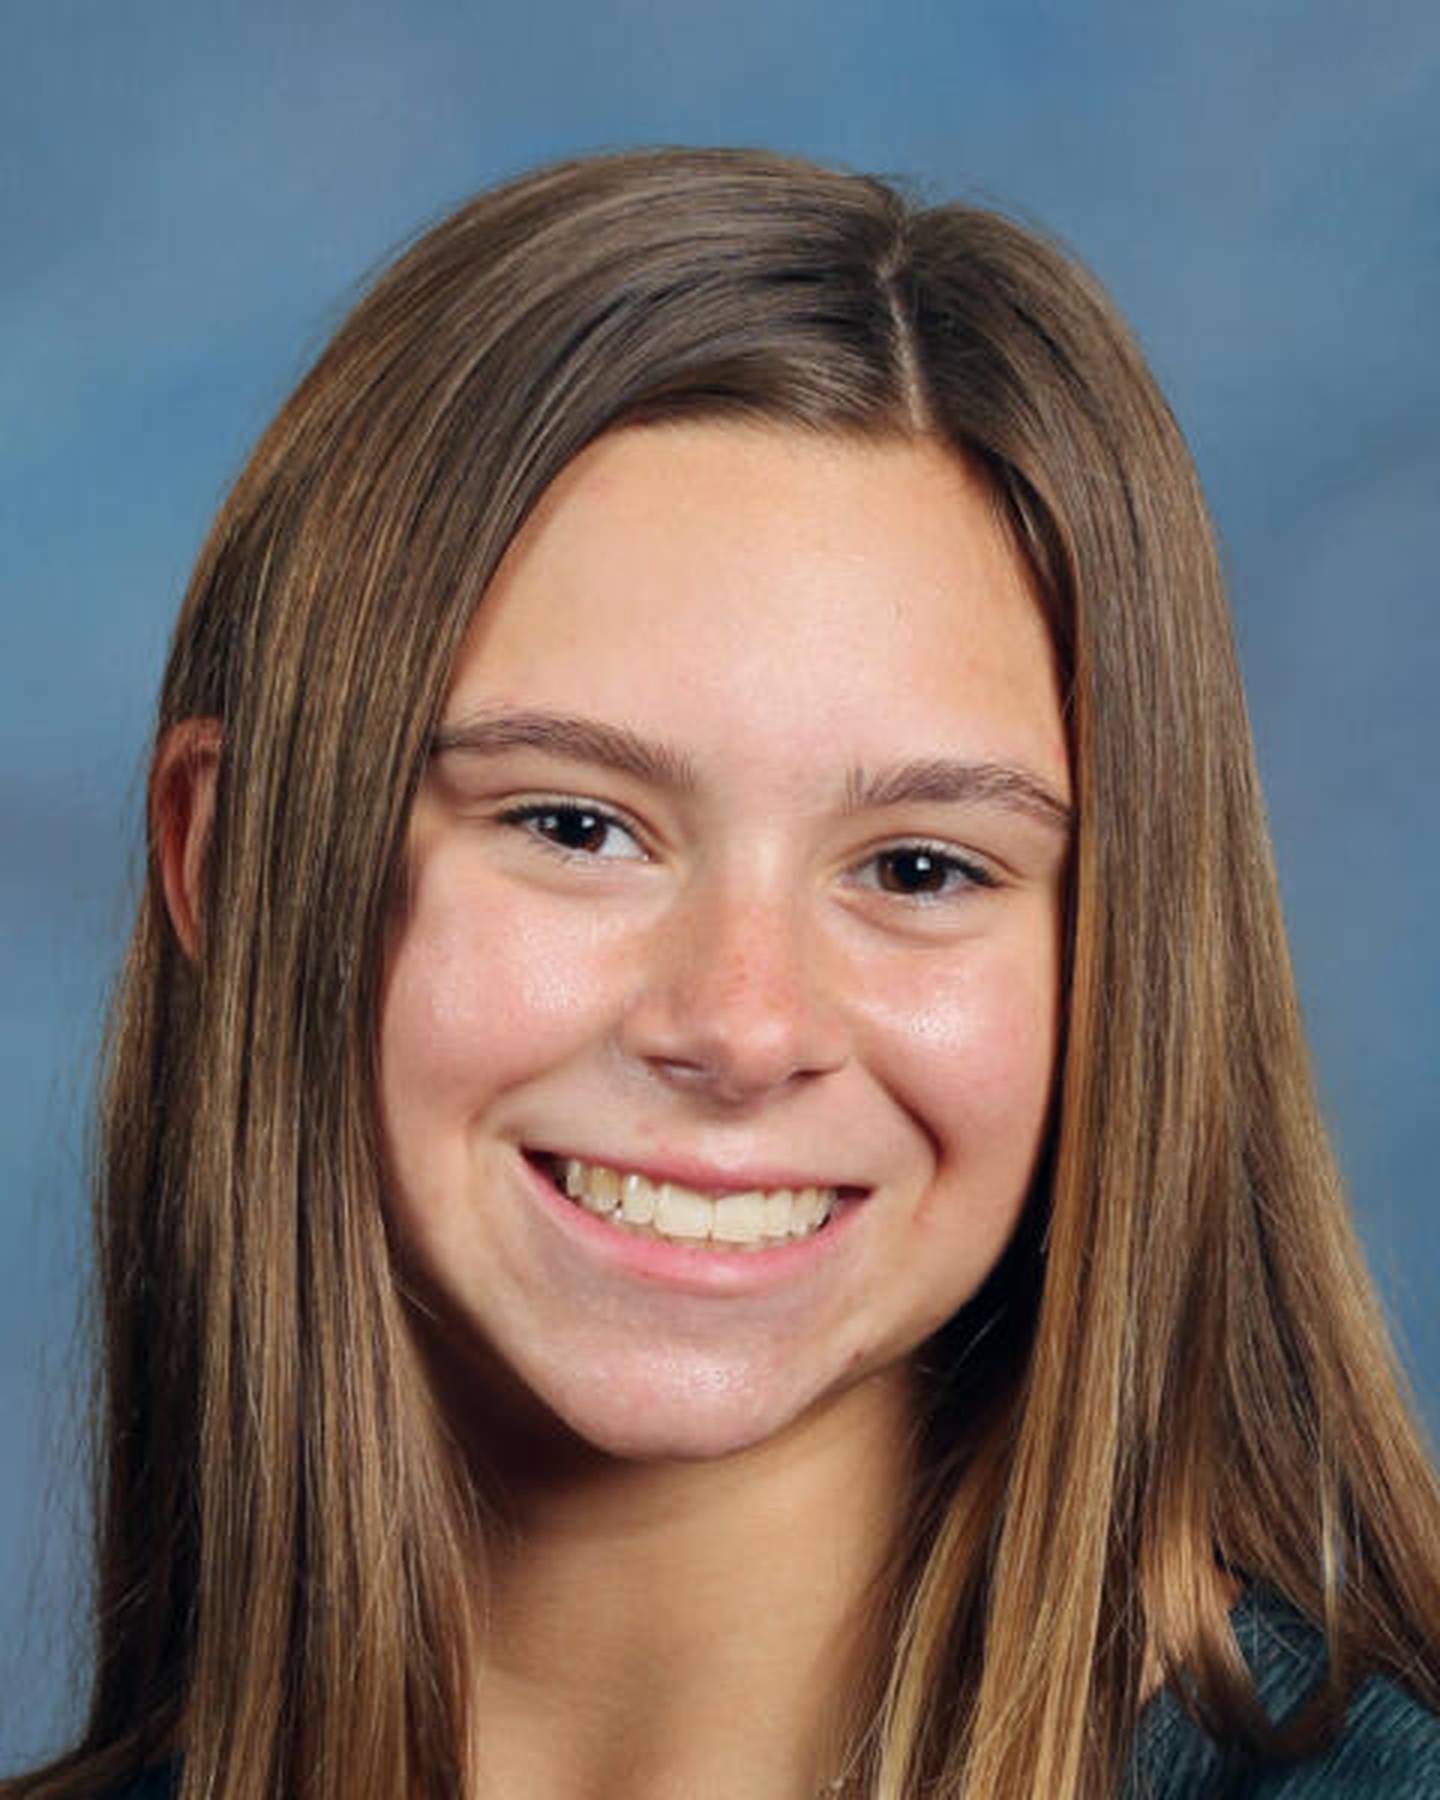 Joliet Catholic Academy named Samantha Horn as a Student of the Month for December 2021.